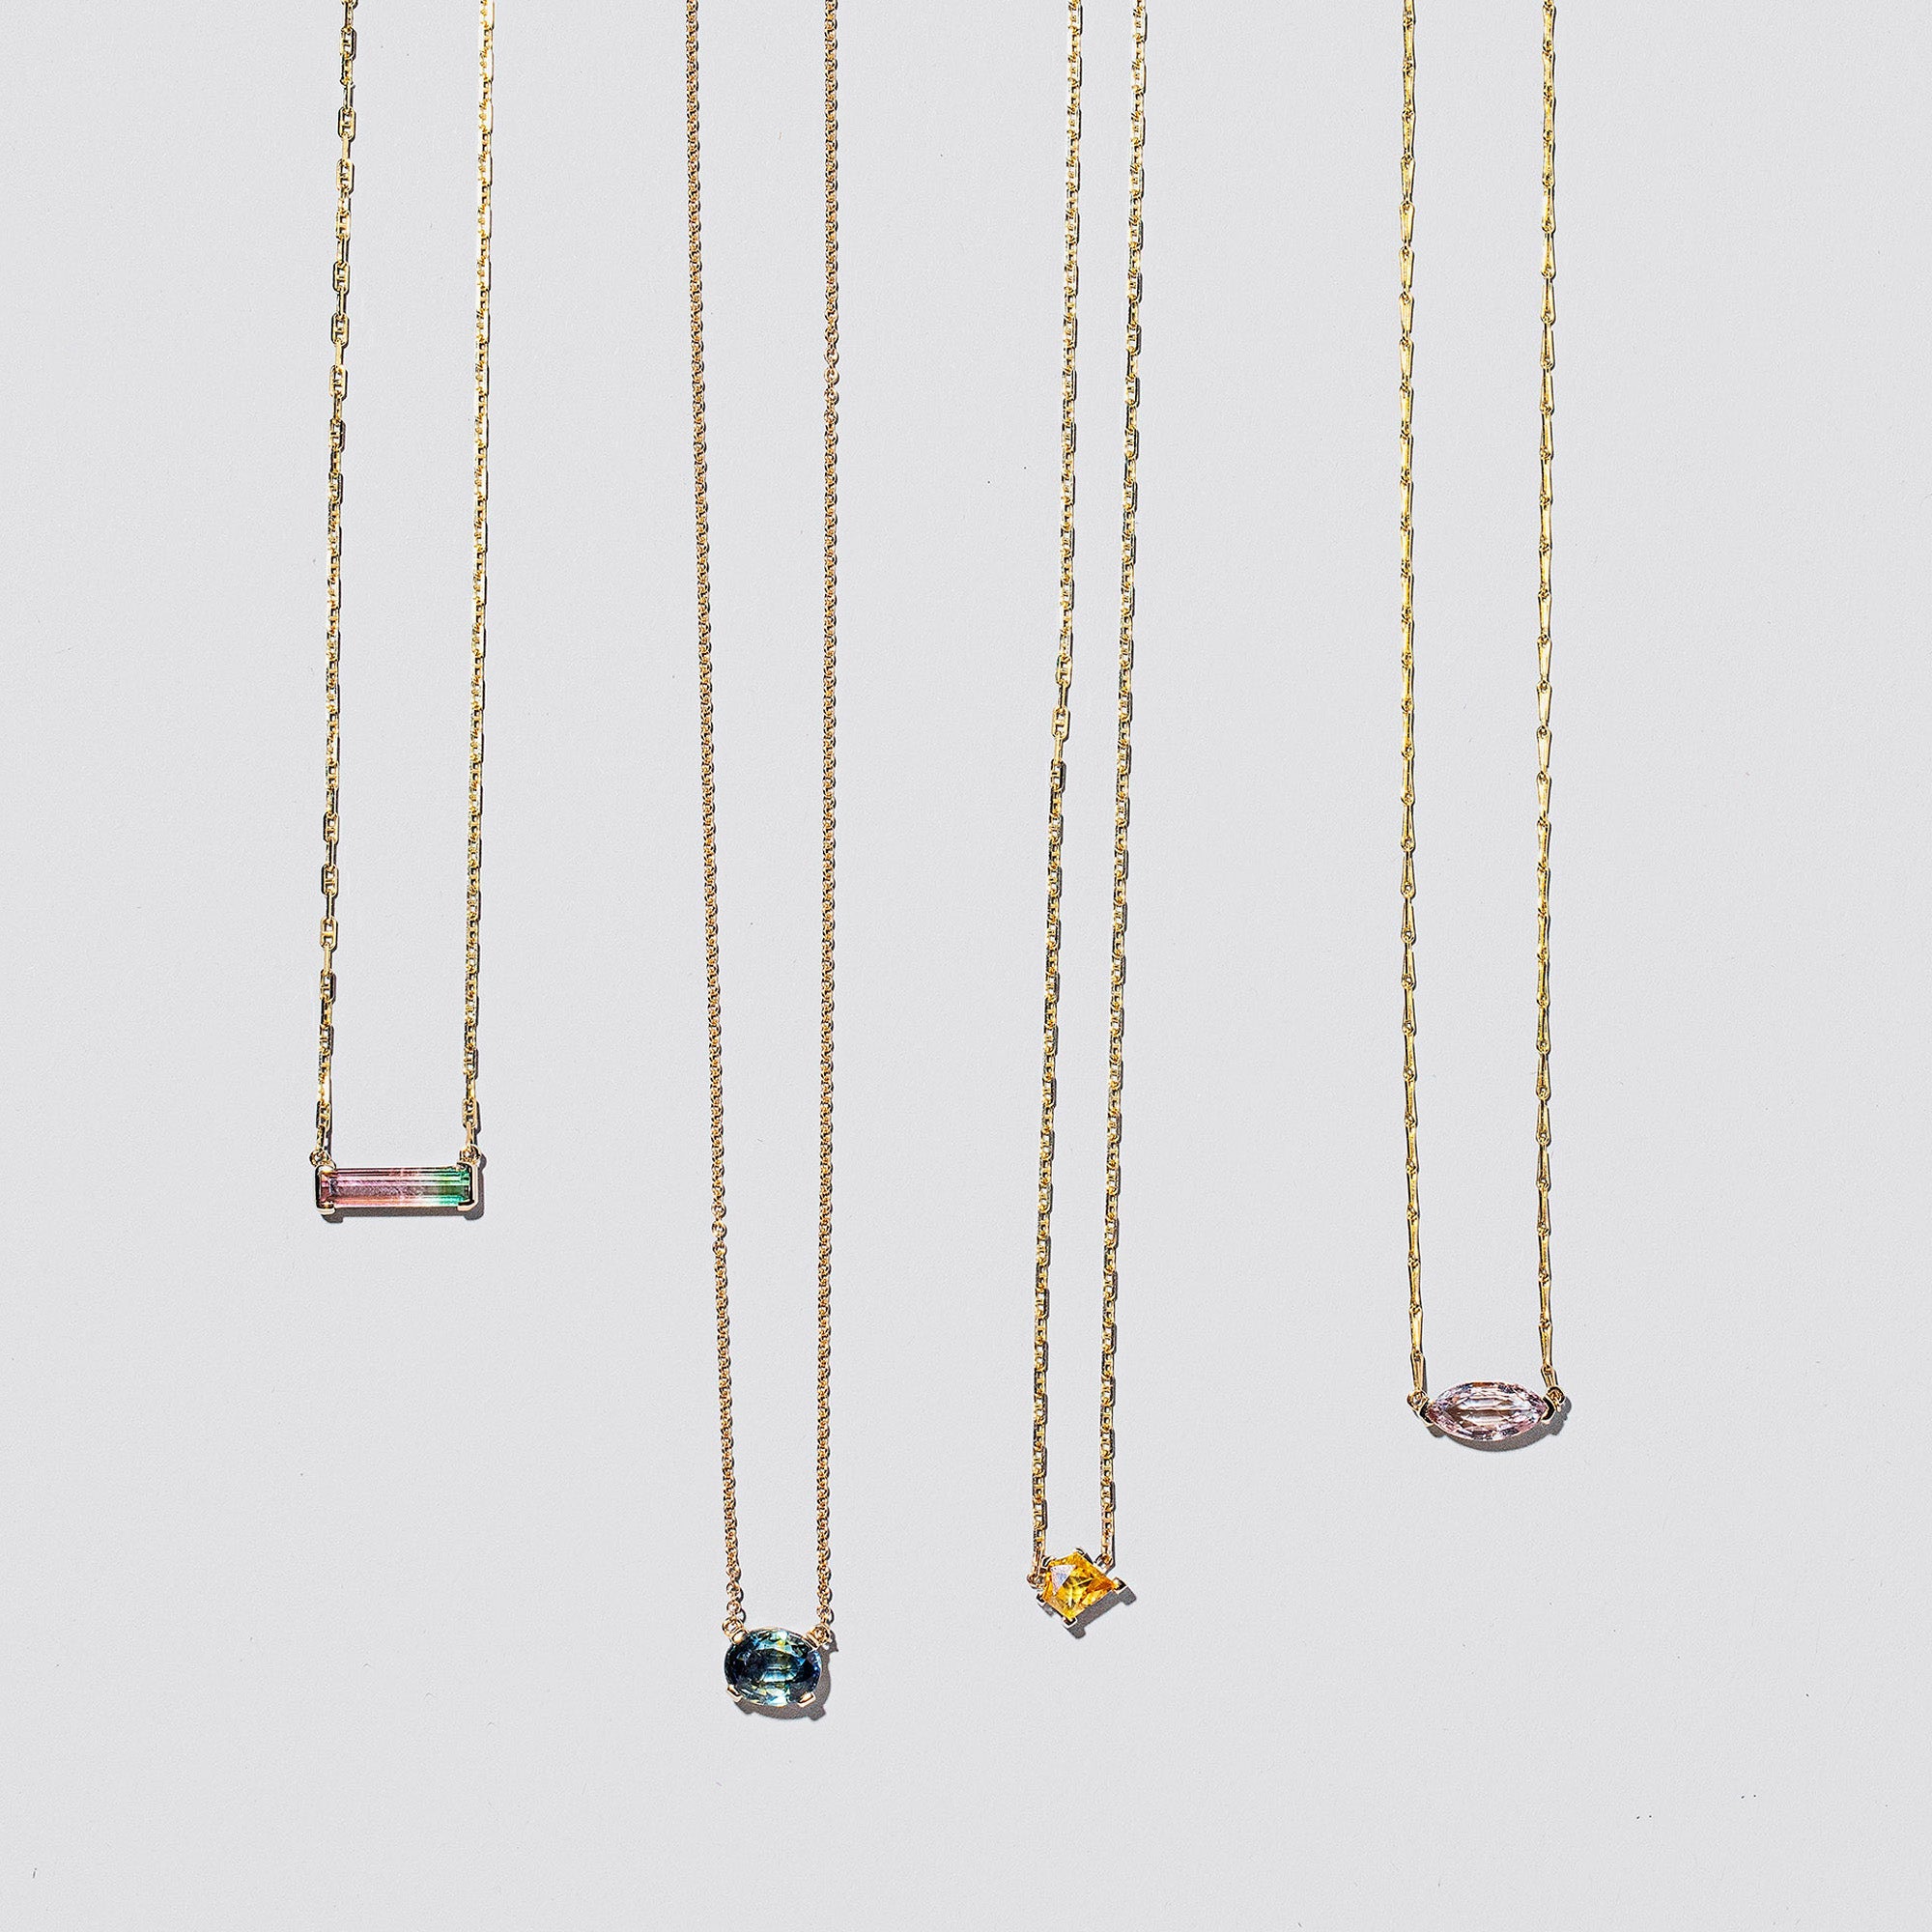 product_details::Group of Gemstone Necklaces on light color background.